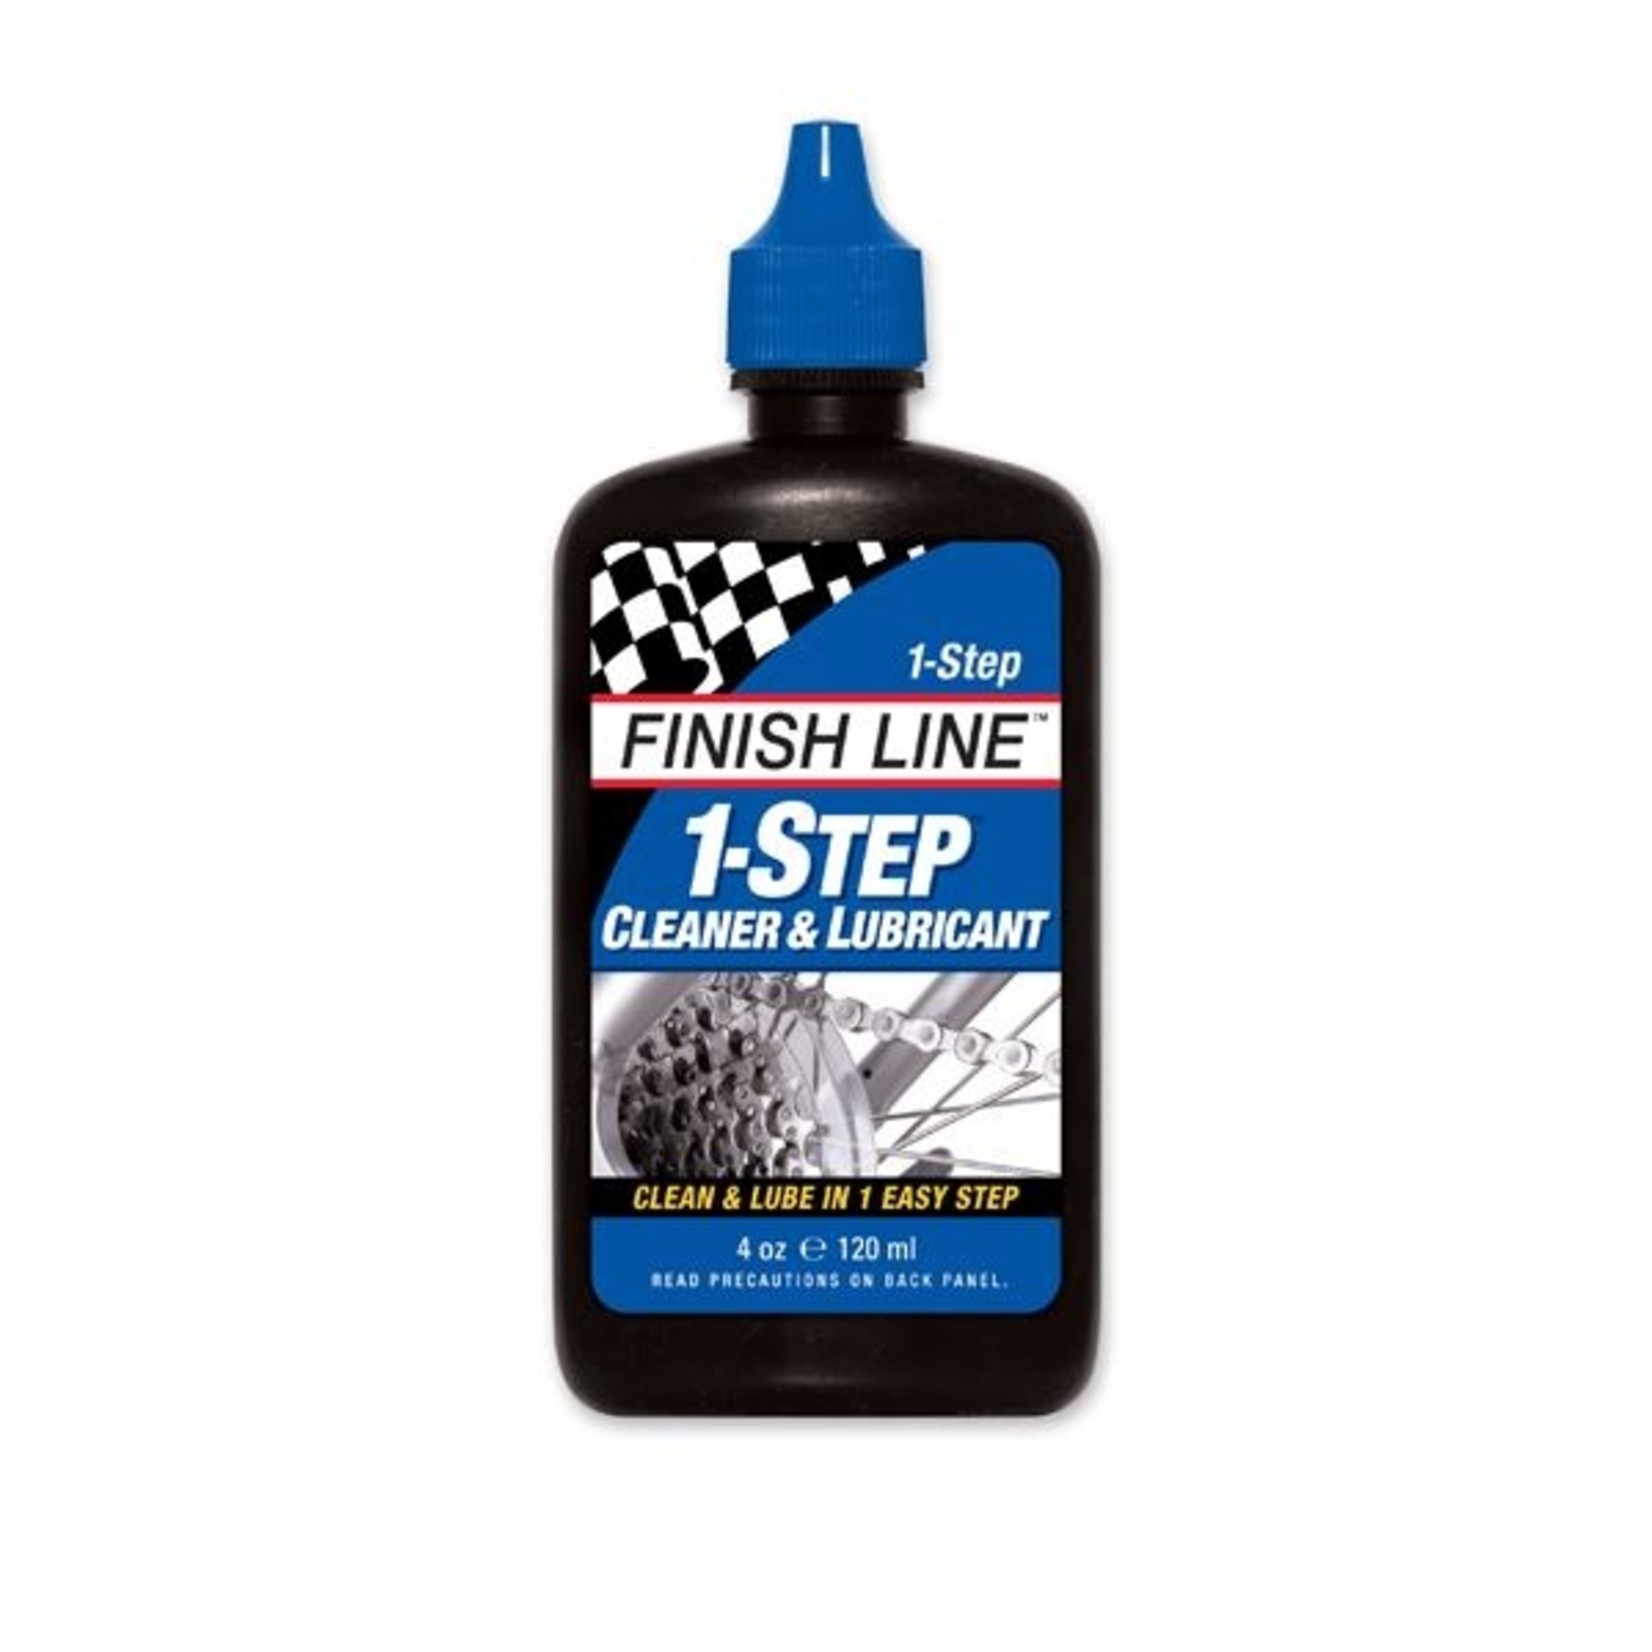 Finish Line Finish Line 1-Step Cleaner & Lube 4oz Rust Protection Set Of 6